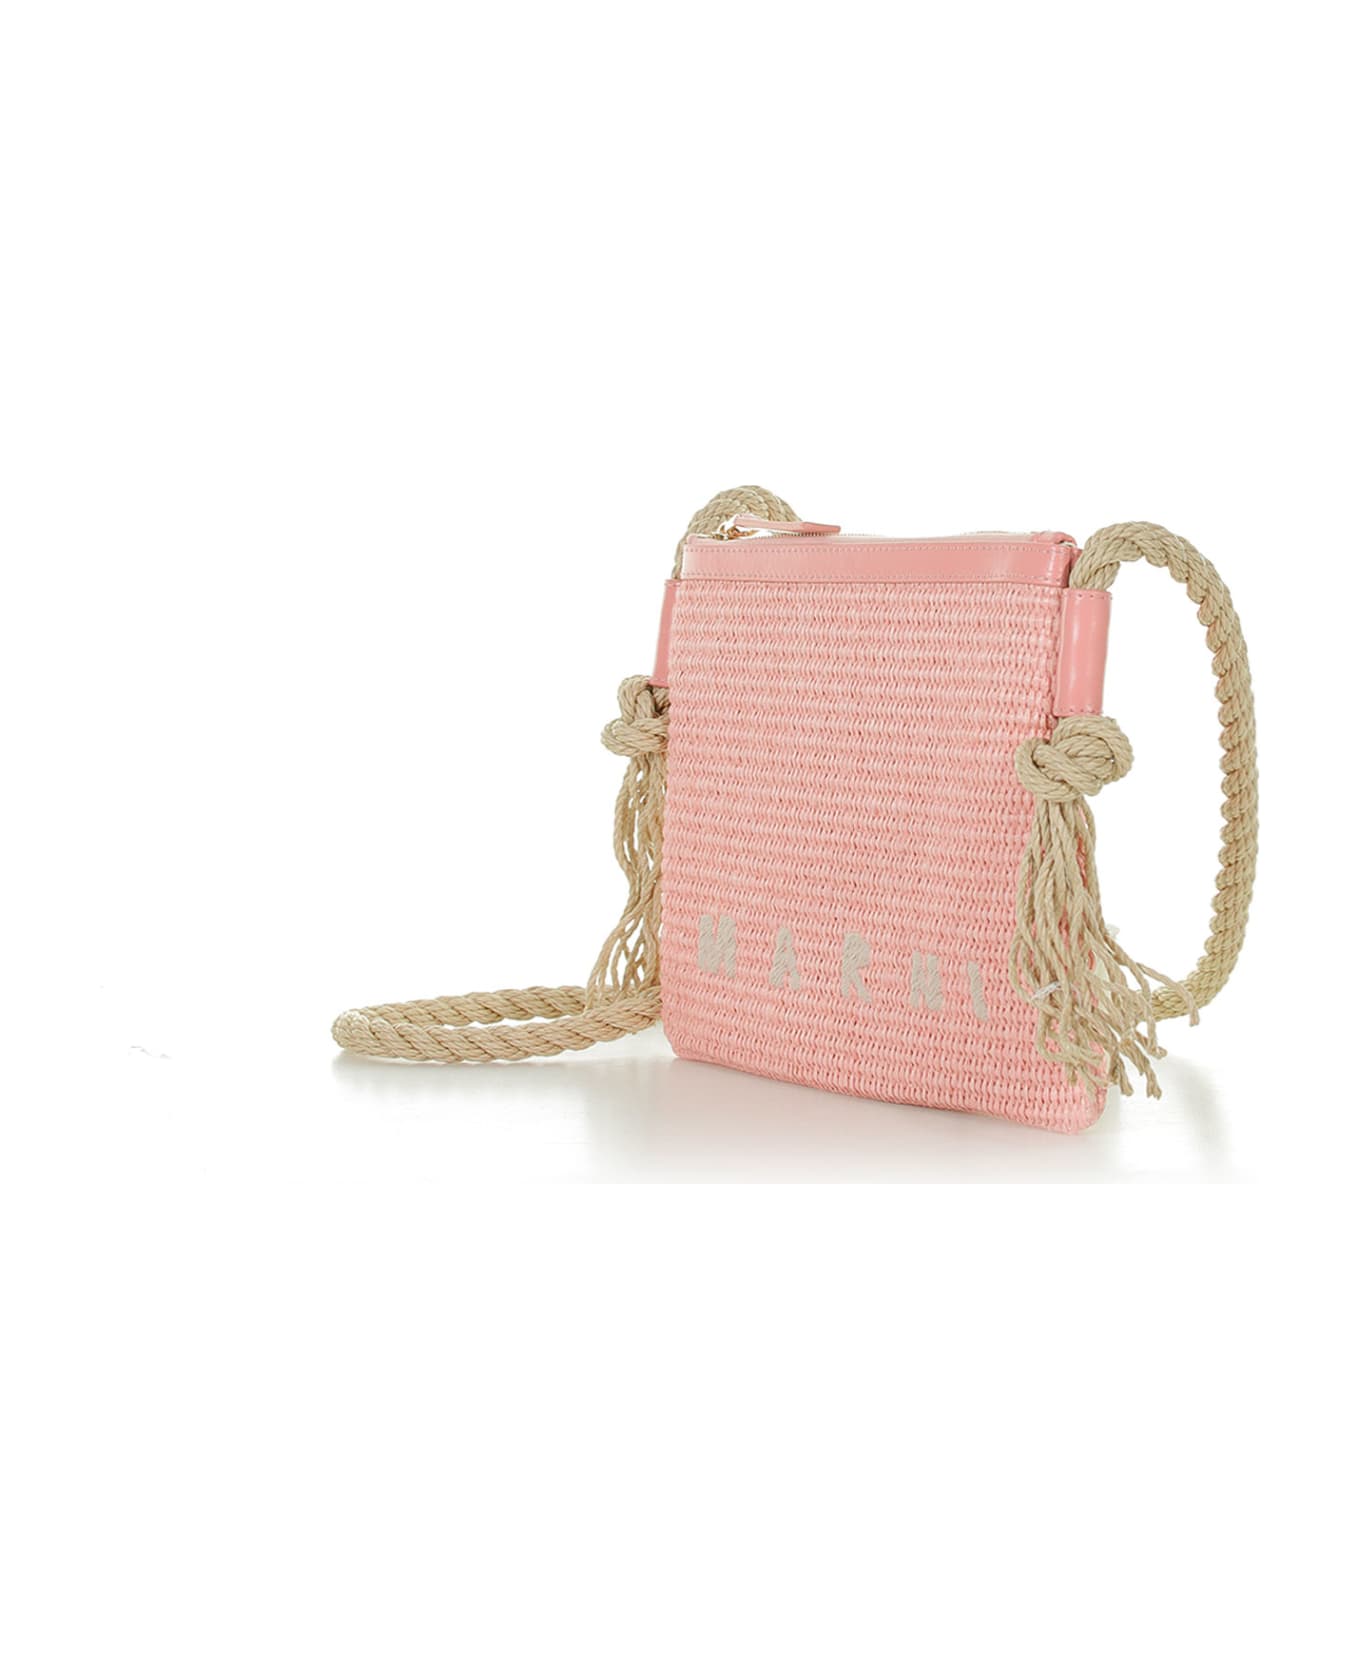 Marni Shoulder Bag In Raffia Fabric With Leather Profiles - LIGHT PINK/LIGHT PINK ショルダーバッグ